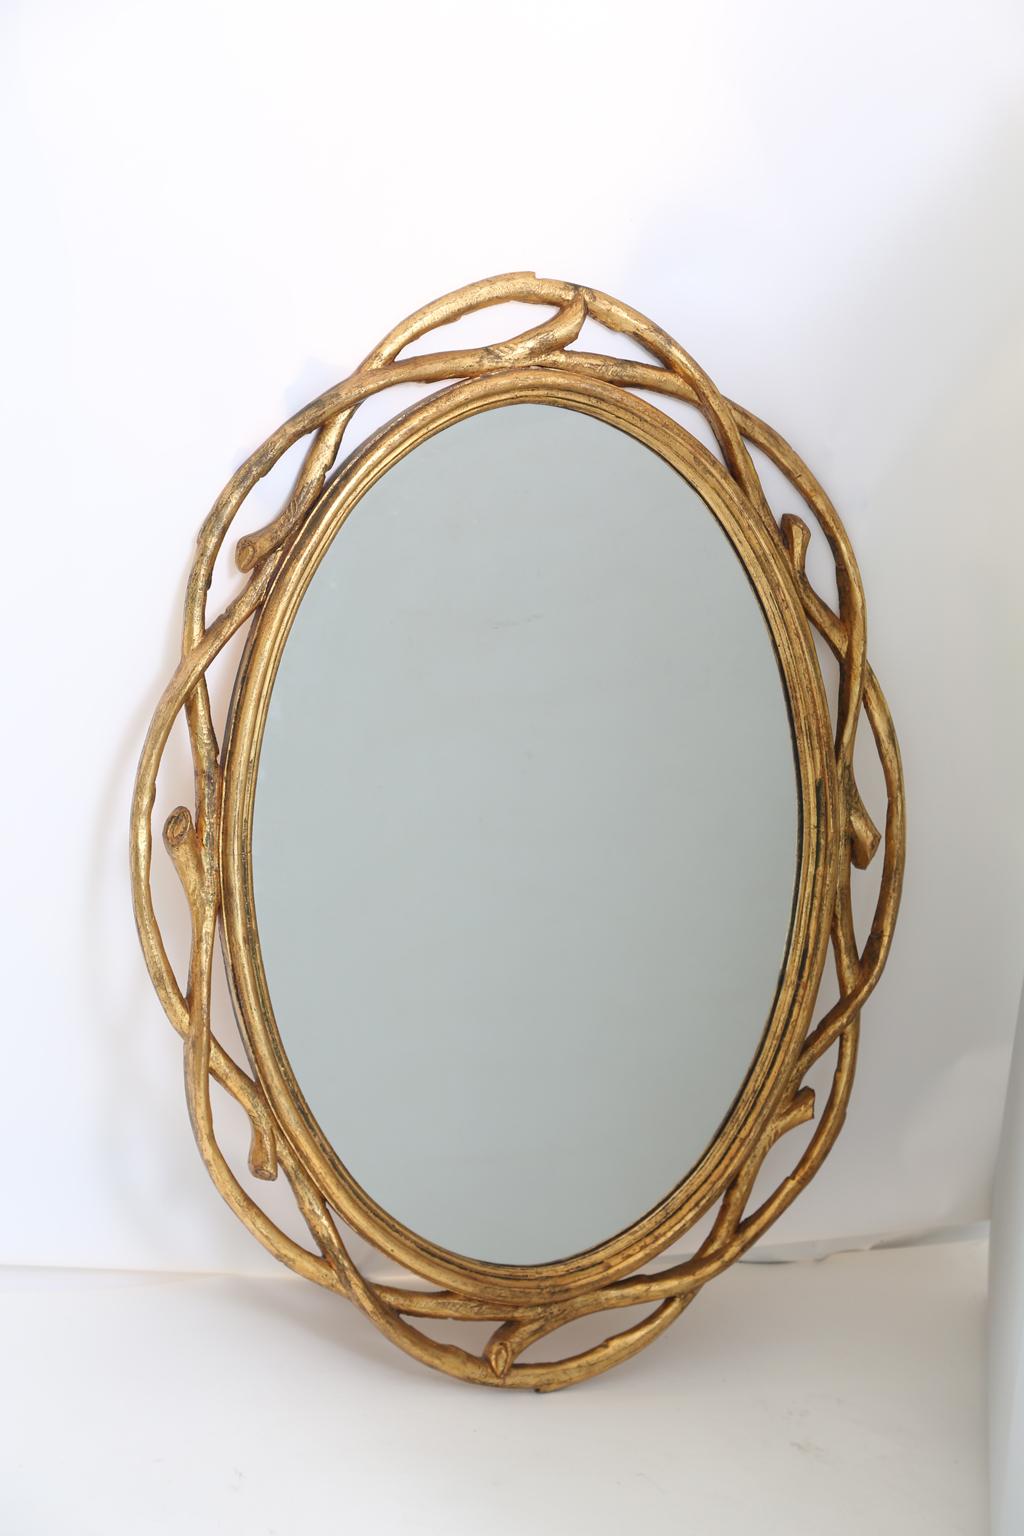 Pair of mirrors, each oval looking glass in a giltwood frame carved as intertwined branches. 

Stock ID: D2503.